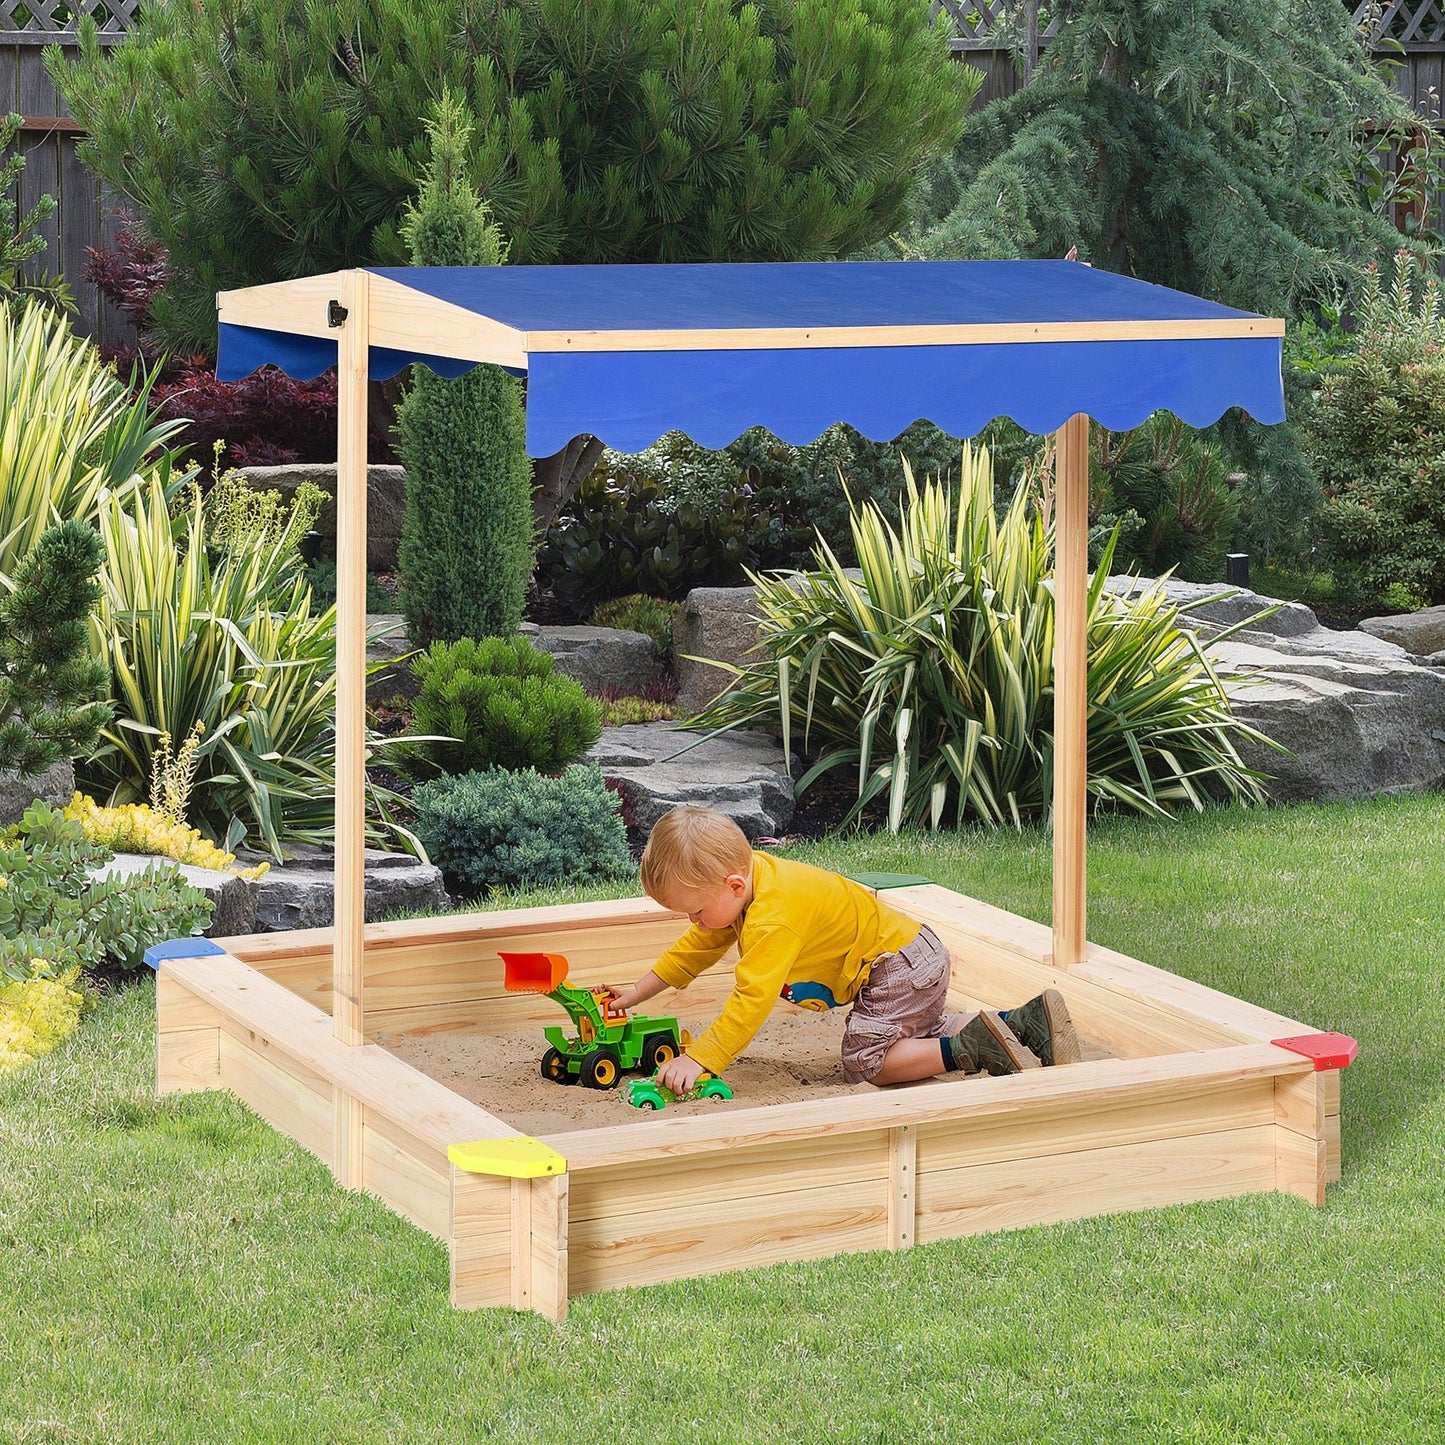 Toys and Games-Wooden Sandbox w/ Adjustable Canopy, Children Outdoor Playset Weather Resistant 47" L x 47" W x 47" H, Natural & Blue - Outdoor Style Company